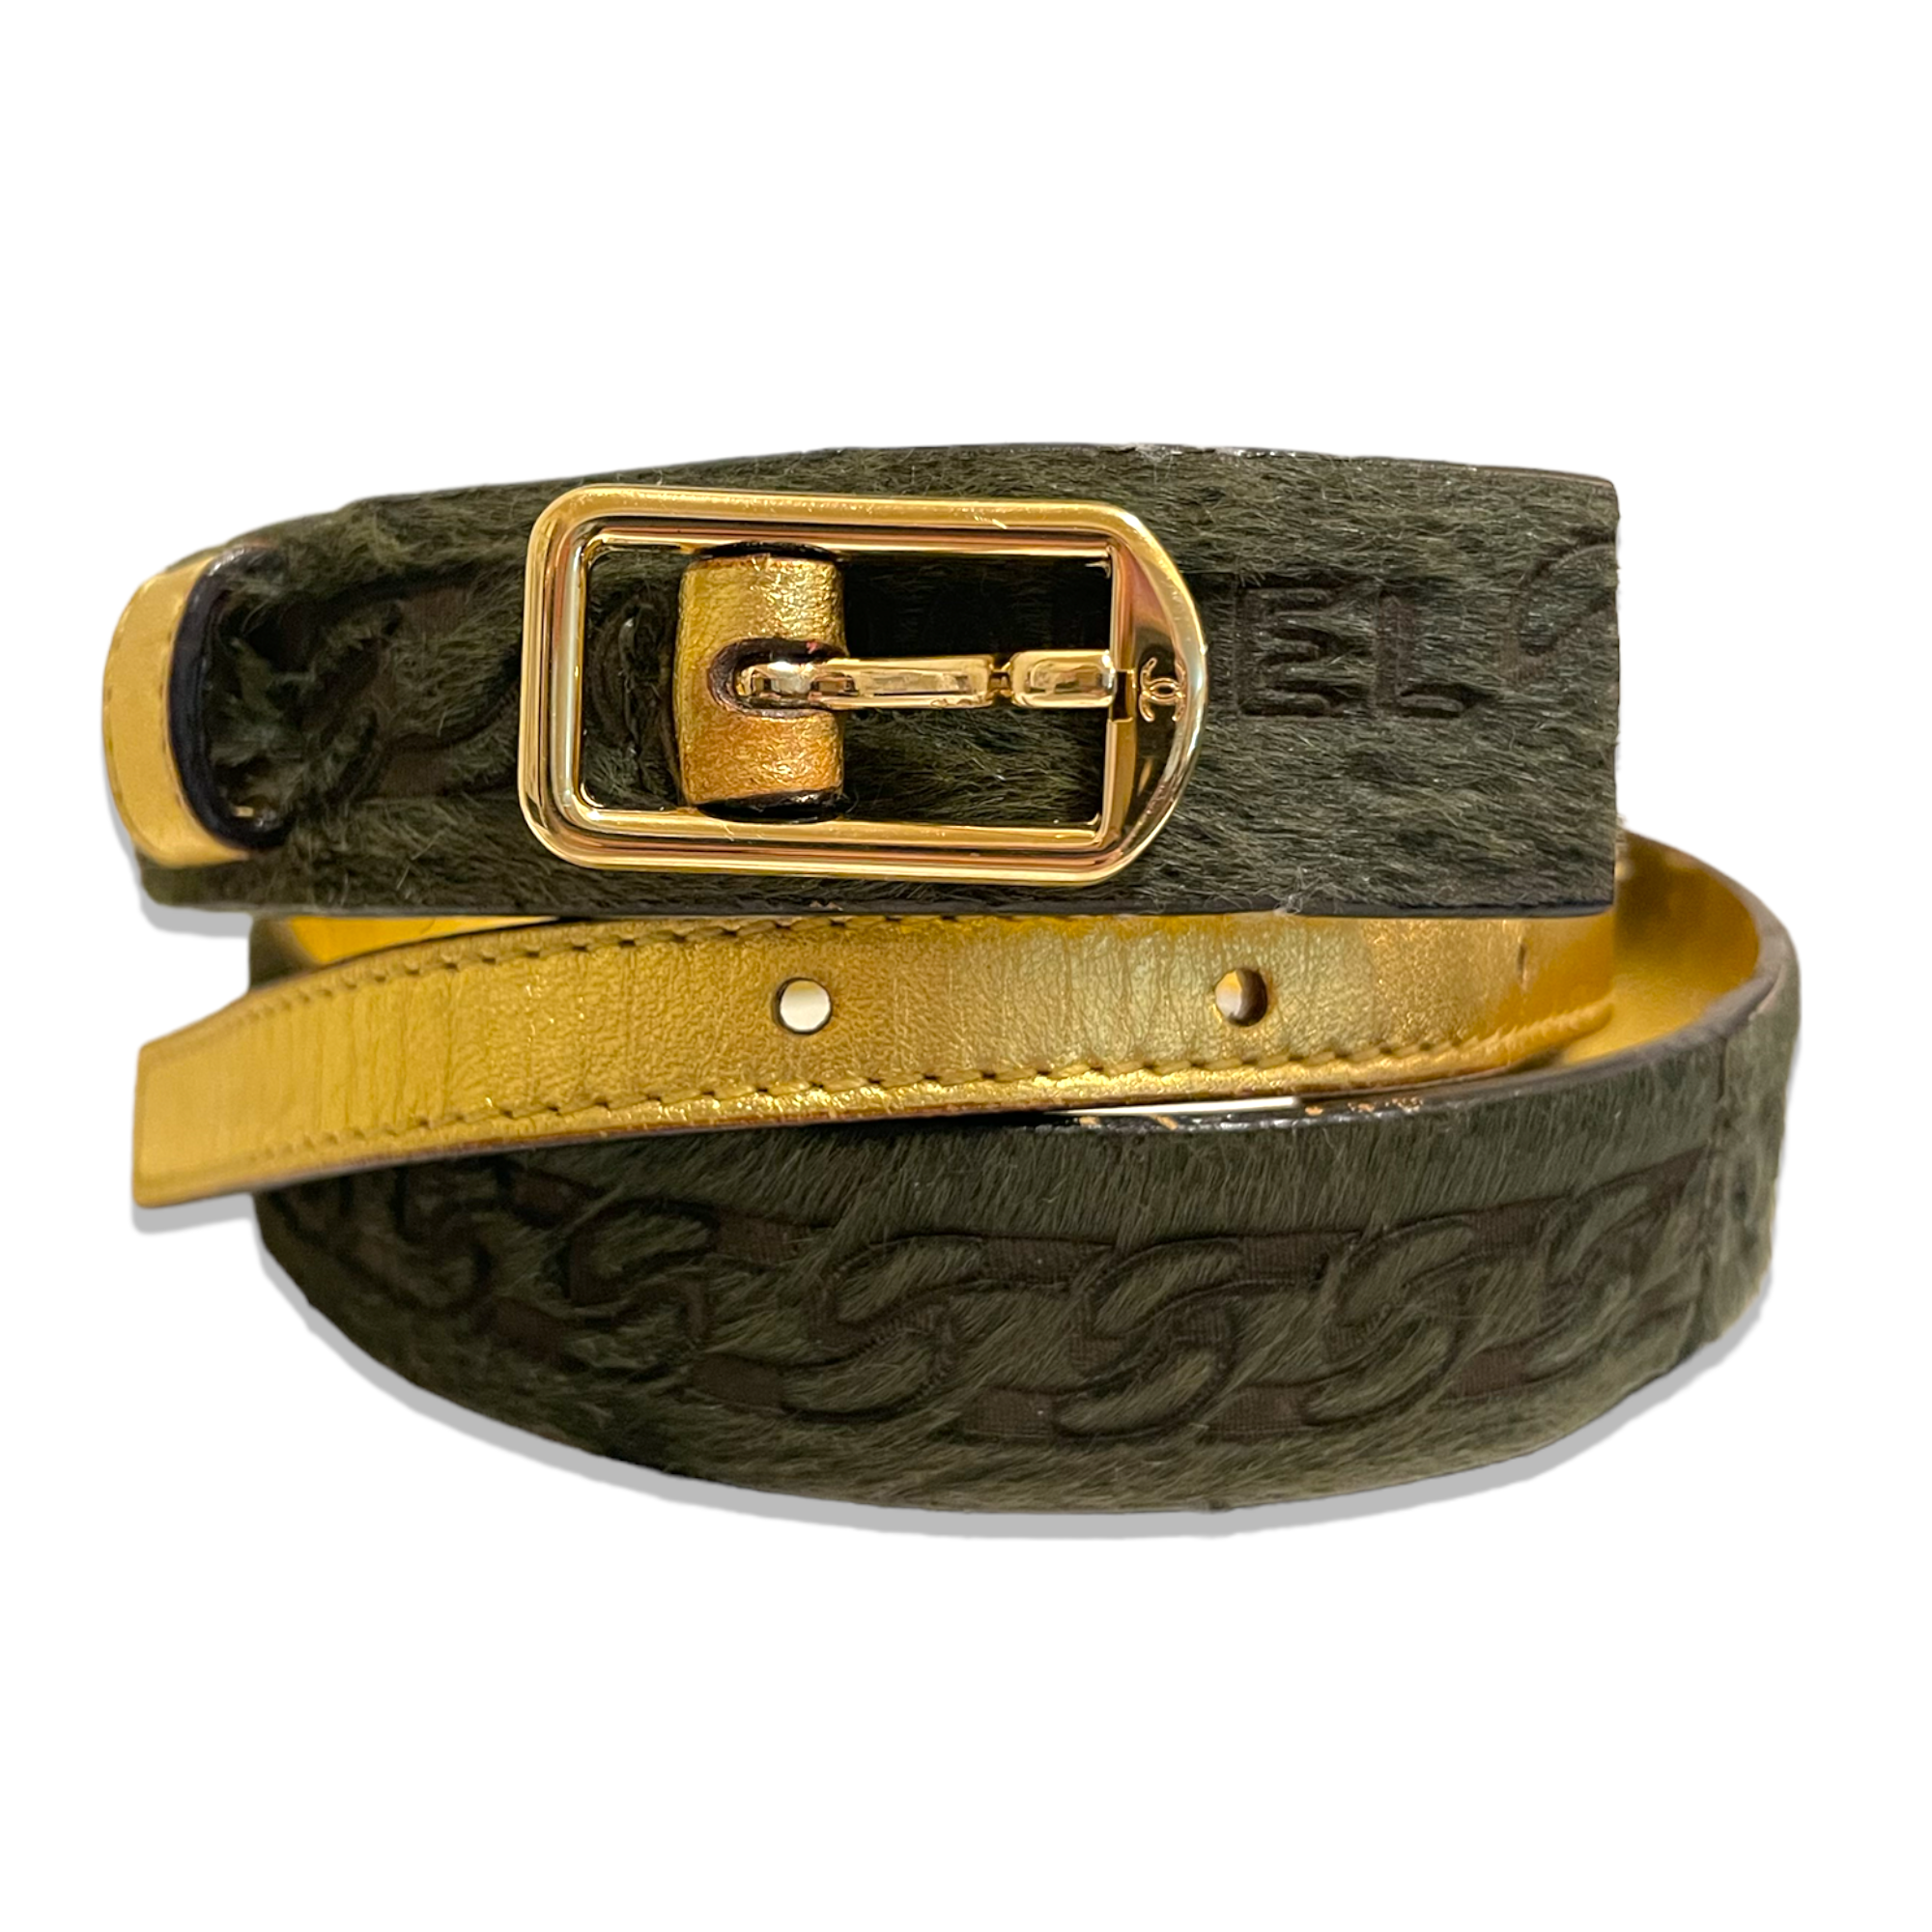 CHANEL Buckle Belt Calf Hair and Leather |Size: 70|